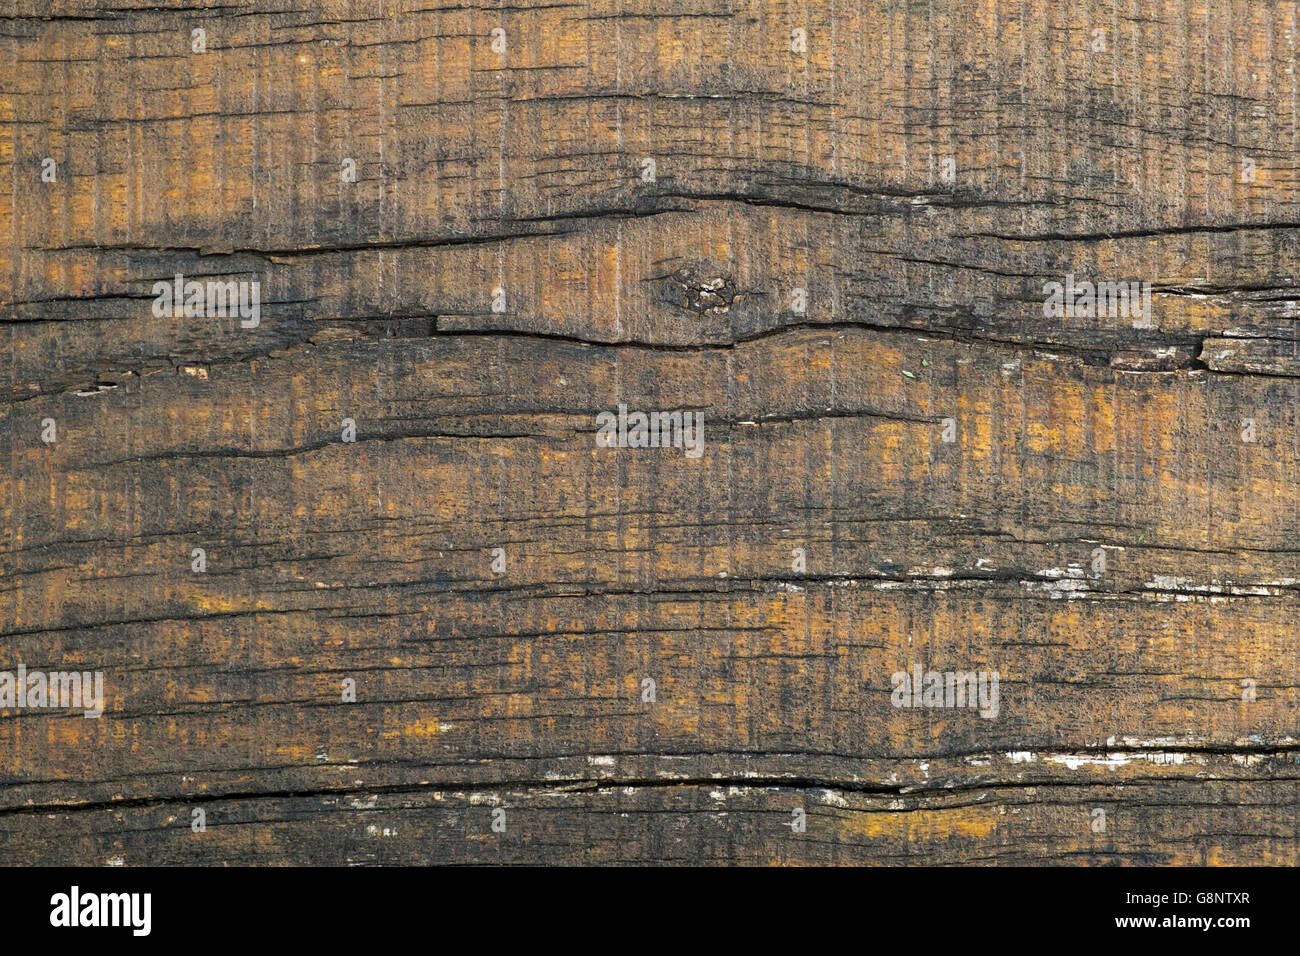 Garden landscaping timber deteriorating due to breakdown of treatment coating. Full frame texture background. Stock Photo